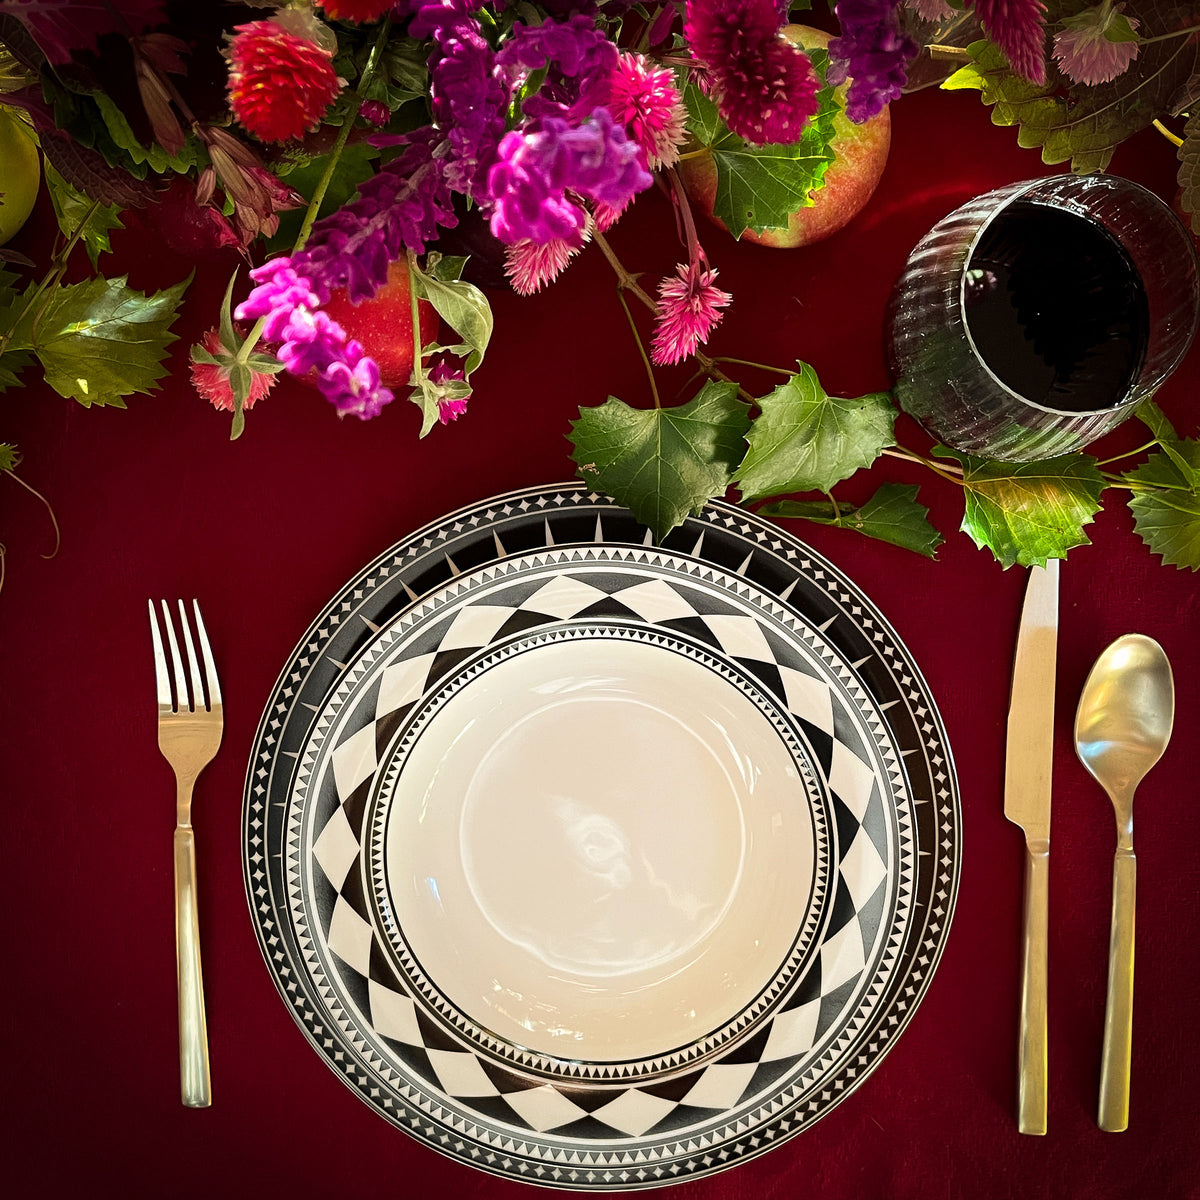 A black and white Fez Rimmed Soup Bowl with flowers on a red cloth, inspired by Moroccan design by Caskata Artisanal Home.